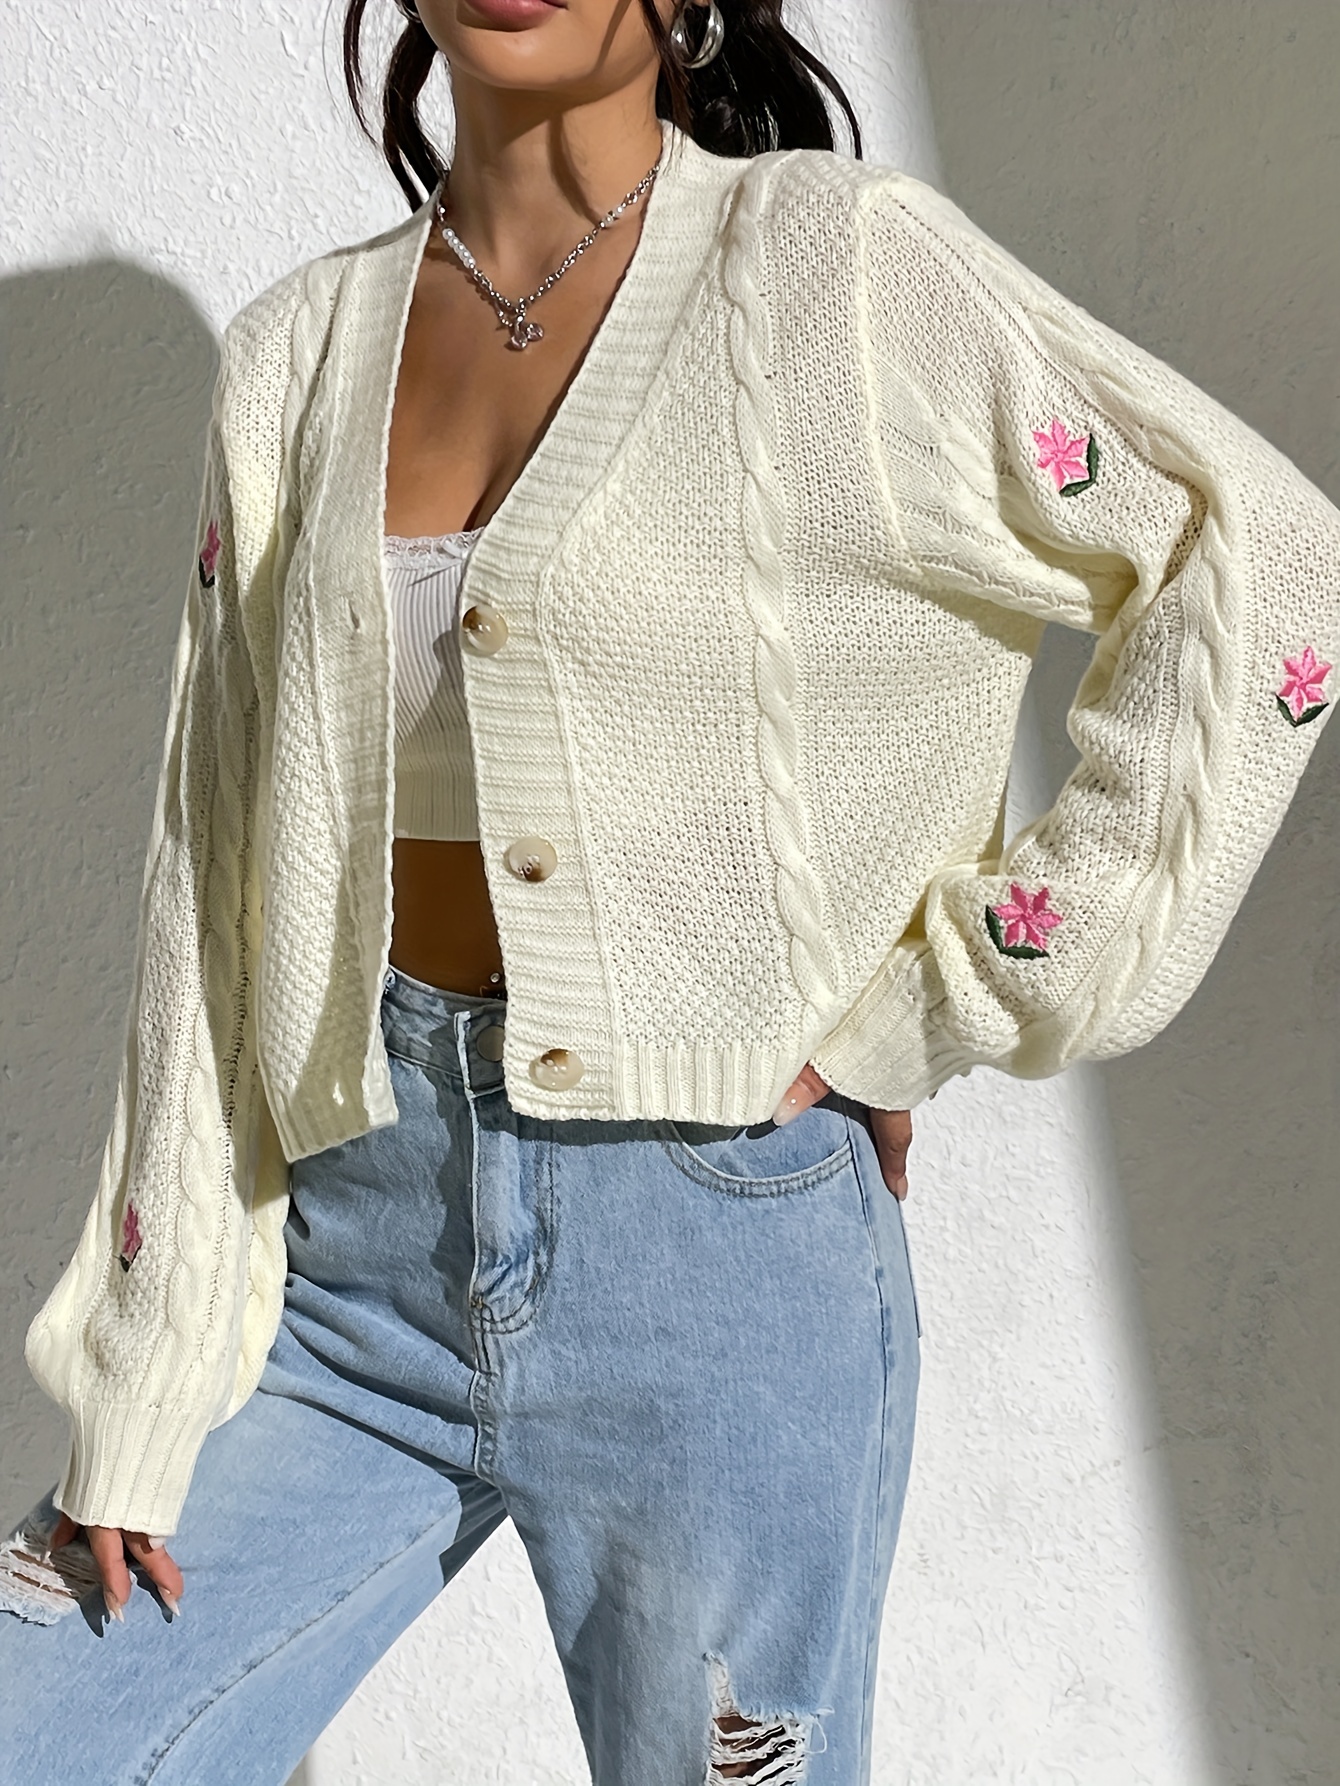 Lady Knitted Floral Cardigan Sweater Crop Tops Coat Retro Button